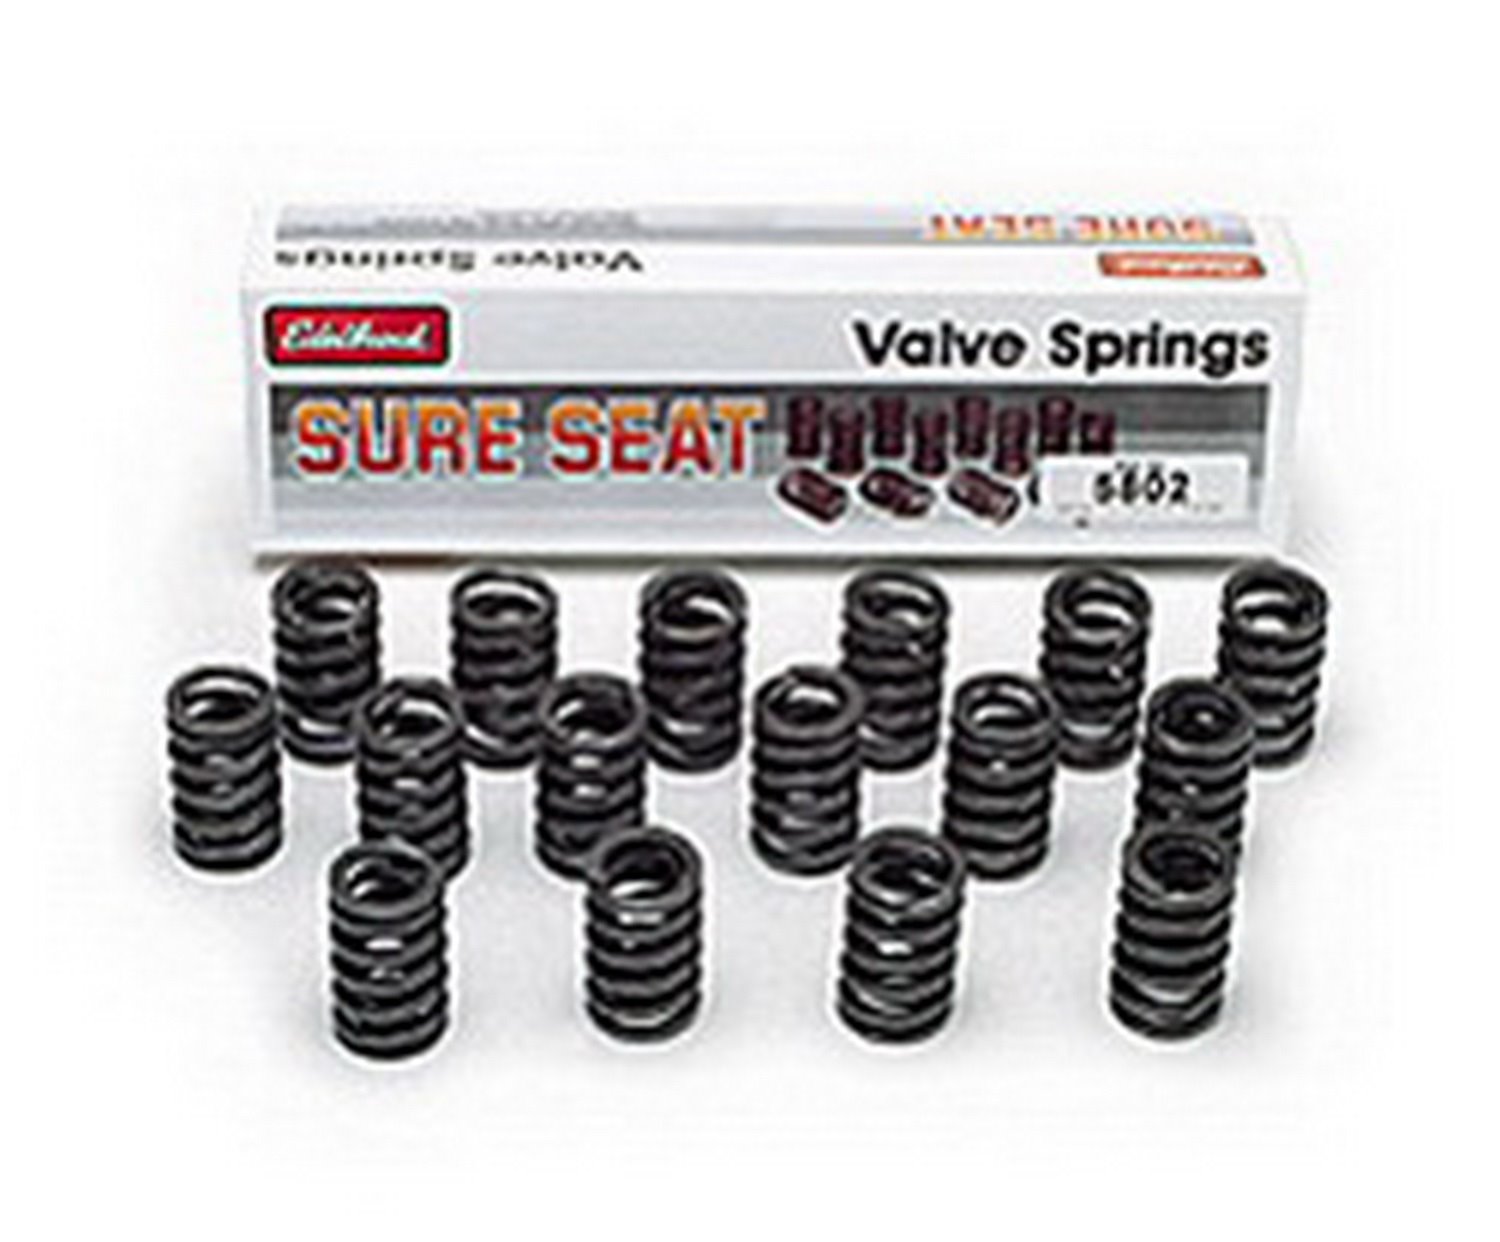 Sure Seat Valve Springs for 1961-1976 Ford FE 390-428 OE Cast Iron Head Non-Rotator